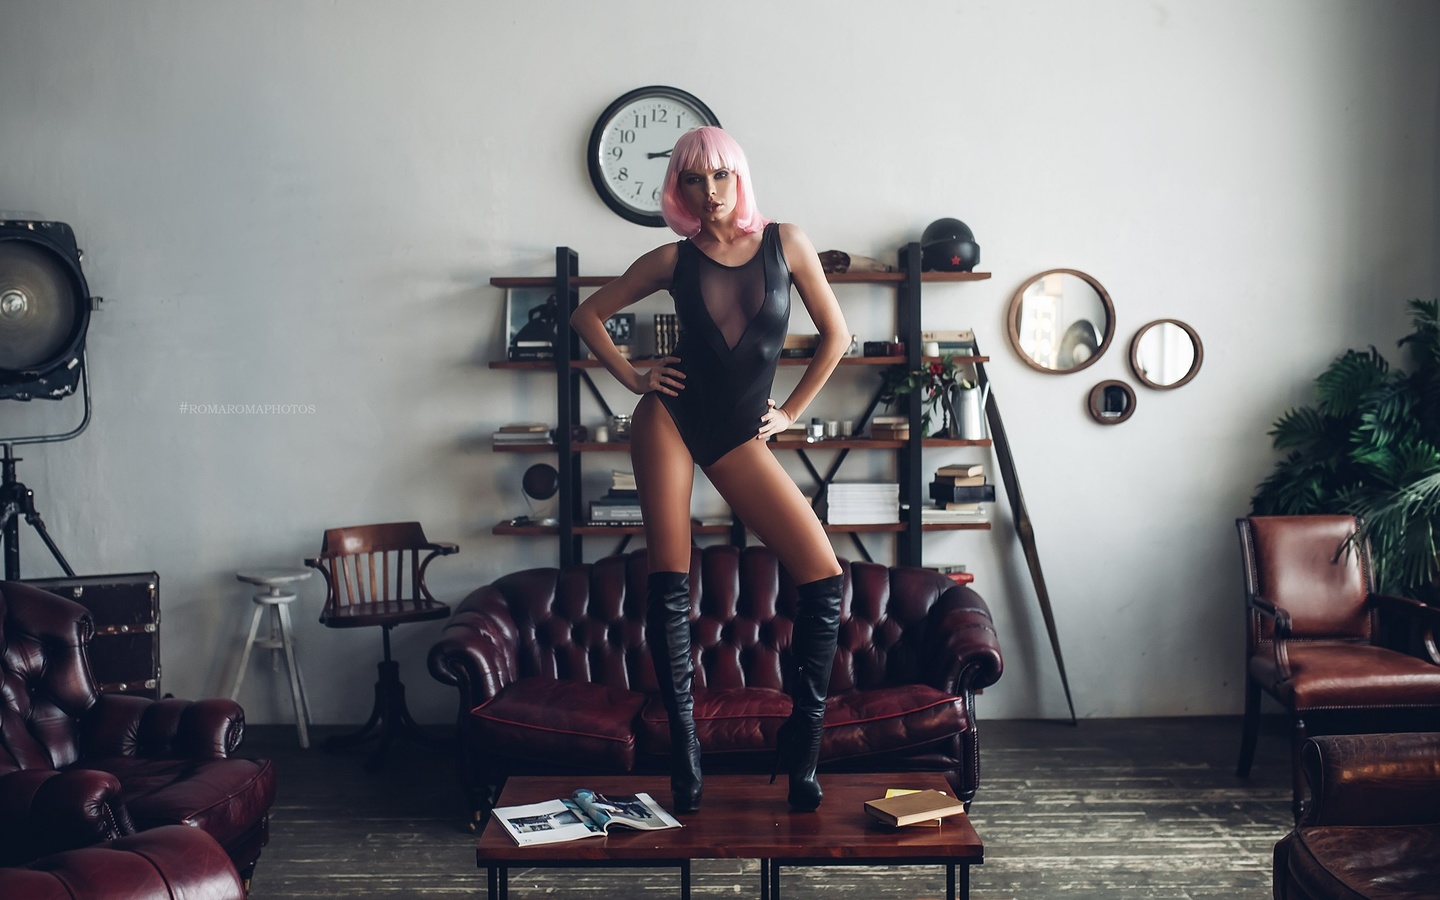 women, wigs, pink hair, monokinis, tanned, knee-high boots, couch, hands on hips